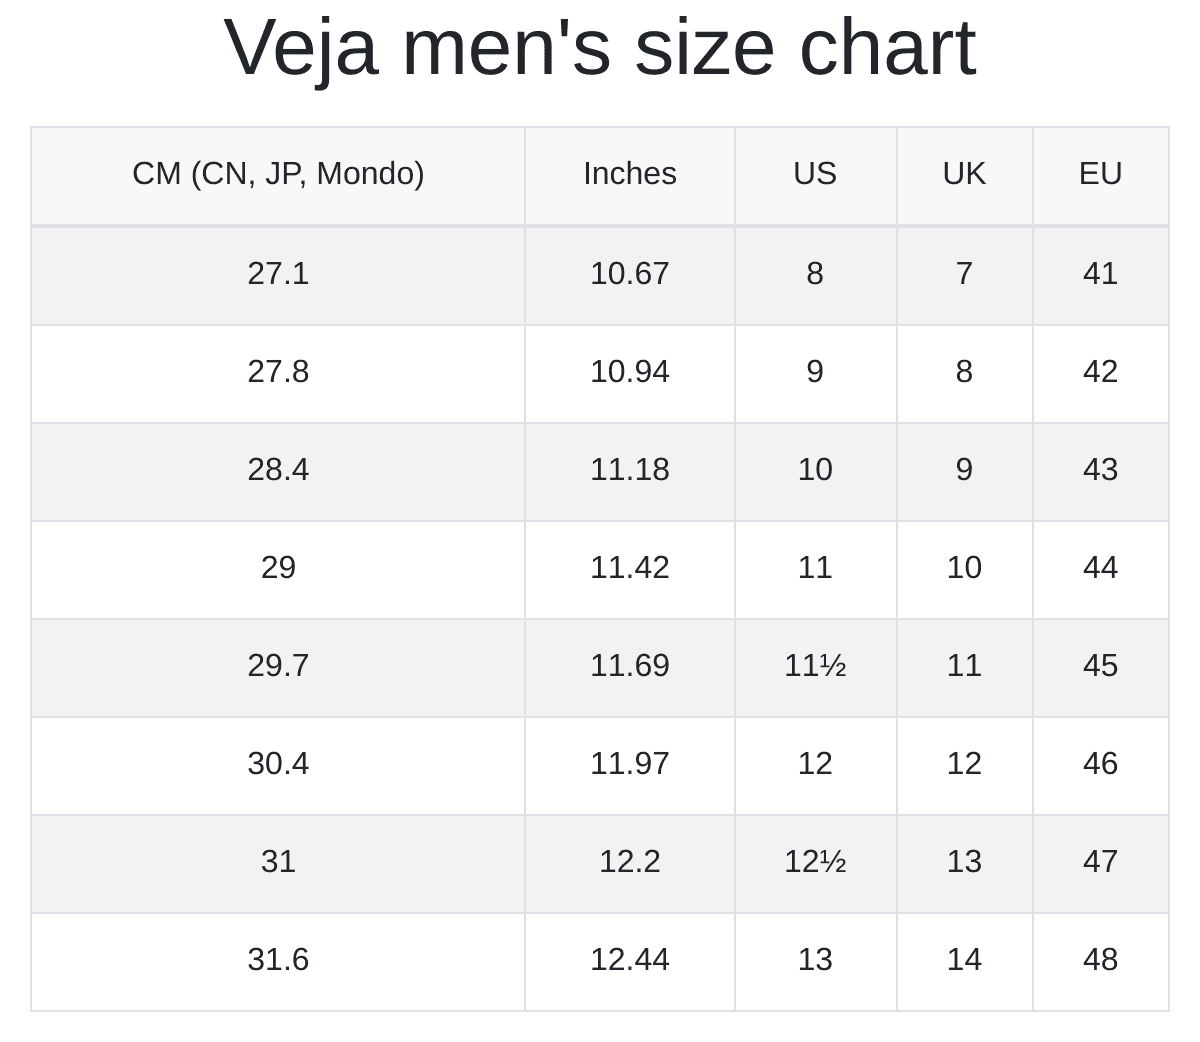 Veja men's and women's size chart